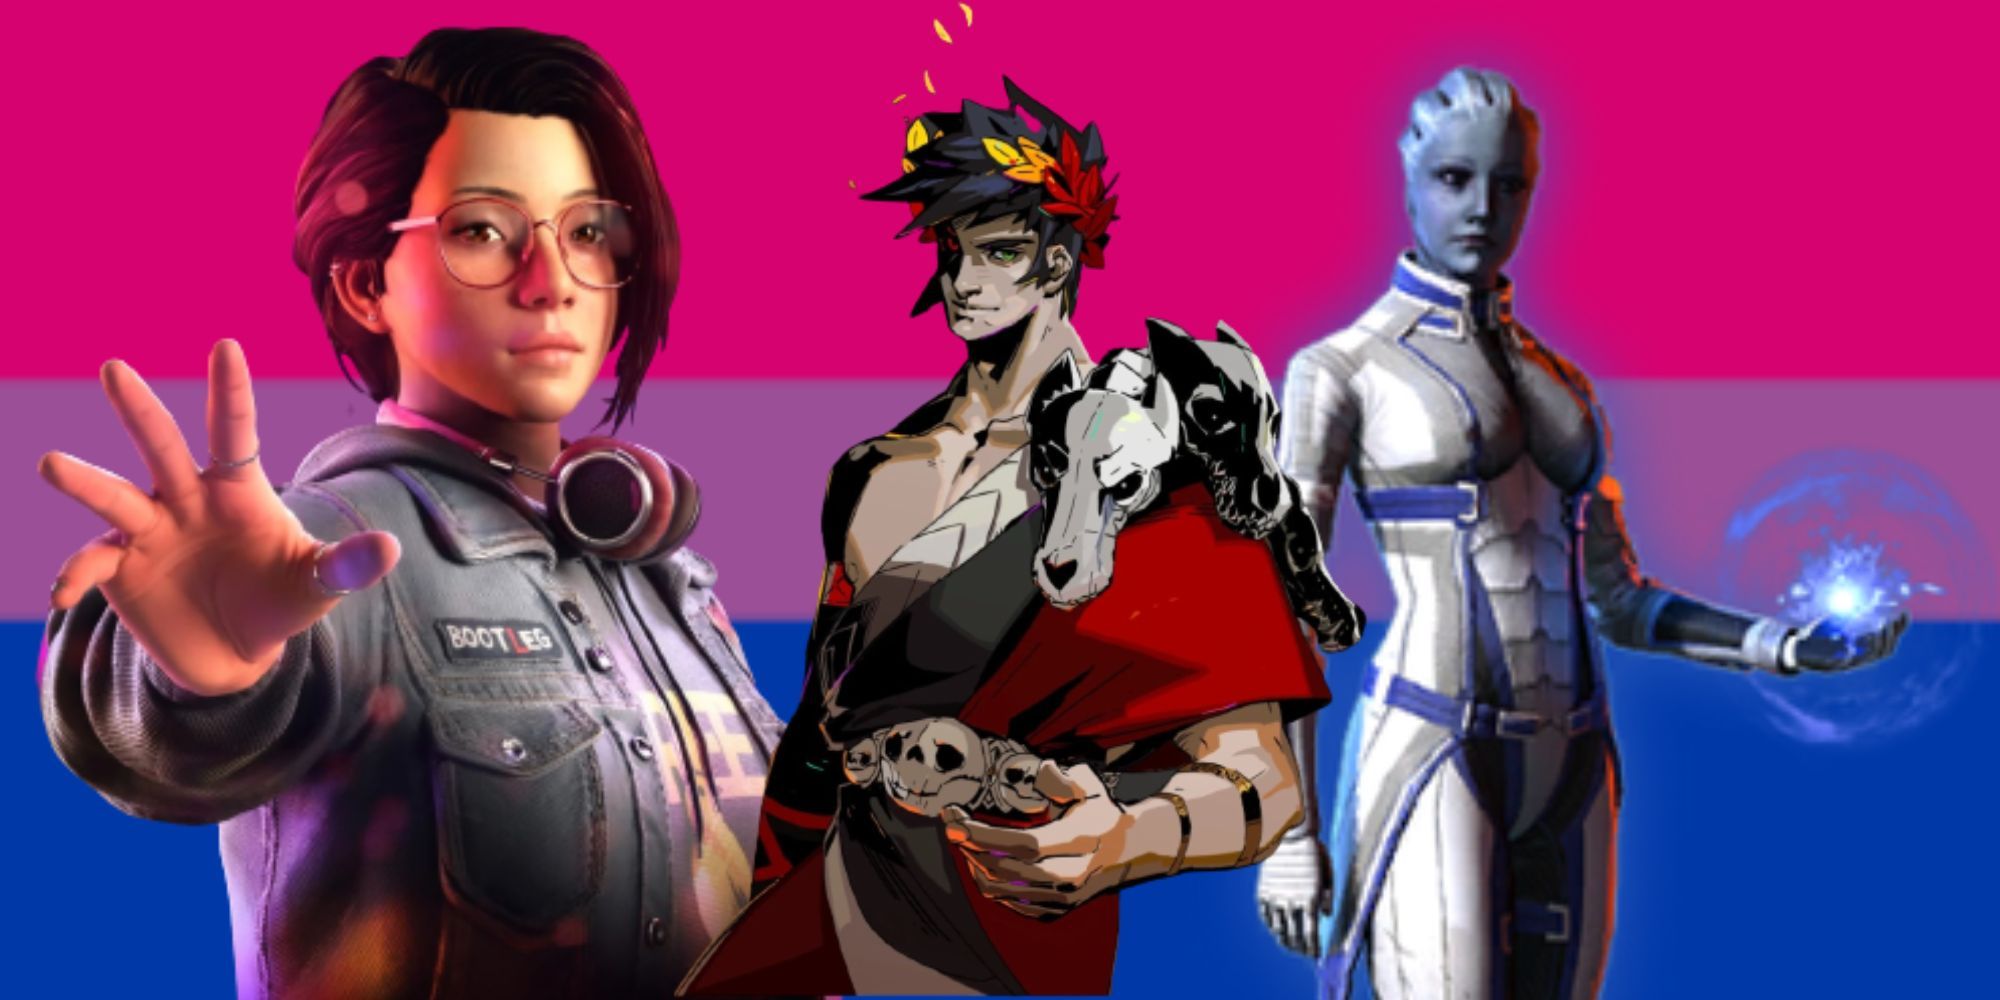 alex chen from life is strange true colors zagreus from hades and liara t'soni from mass effect on a bisexual flag